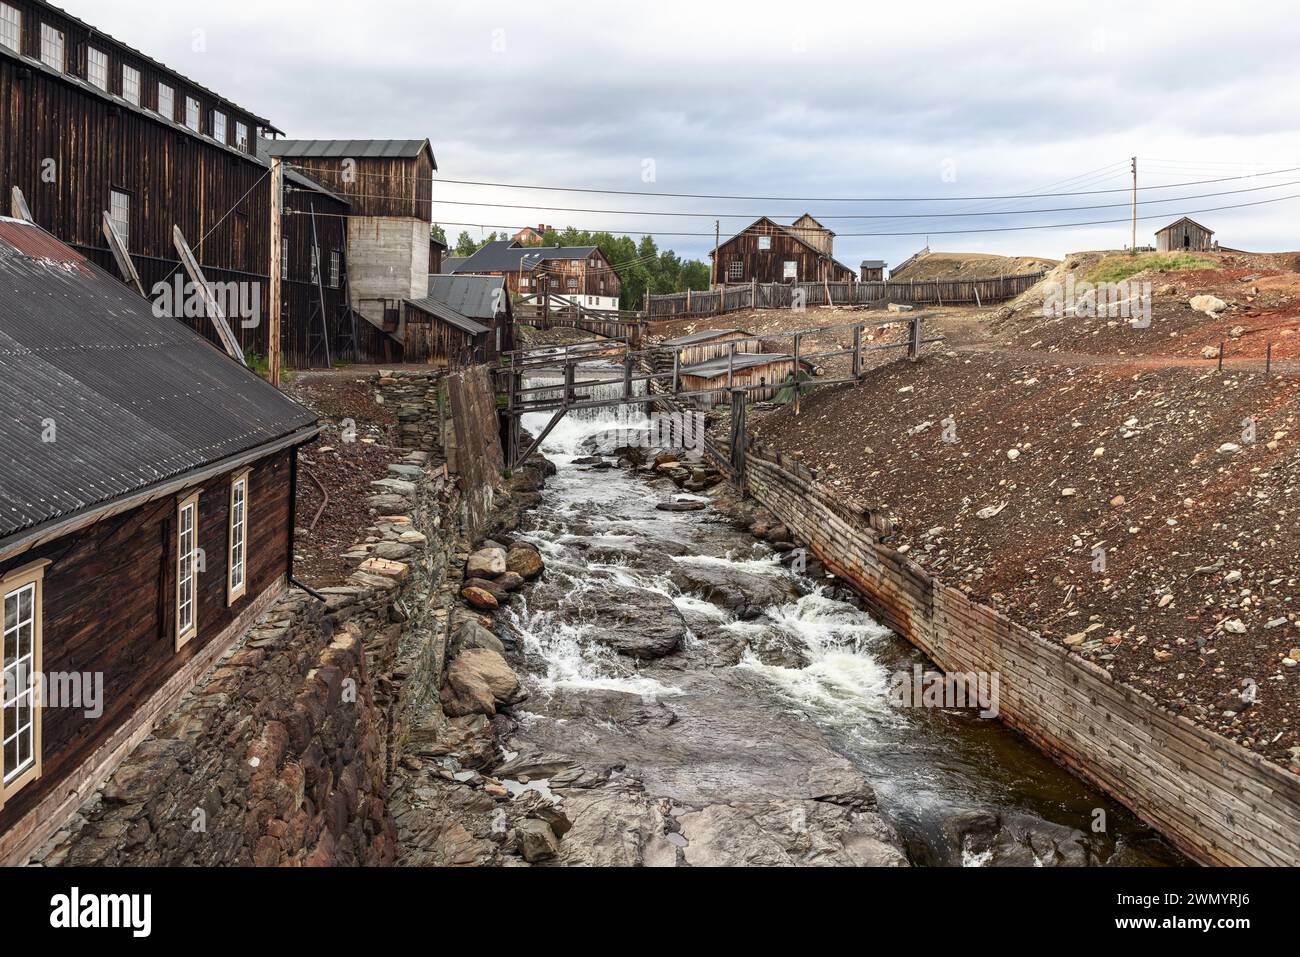 Roros mining landscape, where the forceful Glomma River cuts through, framed by weathered wooden buildings and mining remnants. Norway Stock Photo